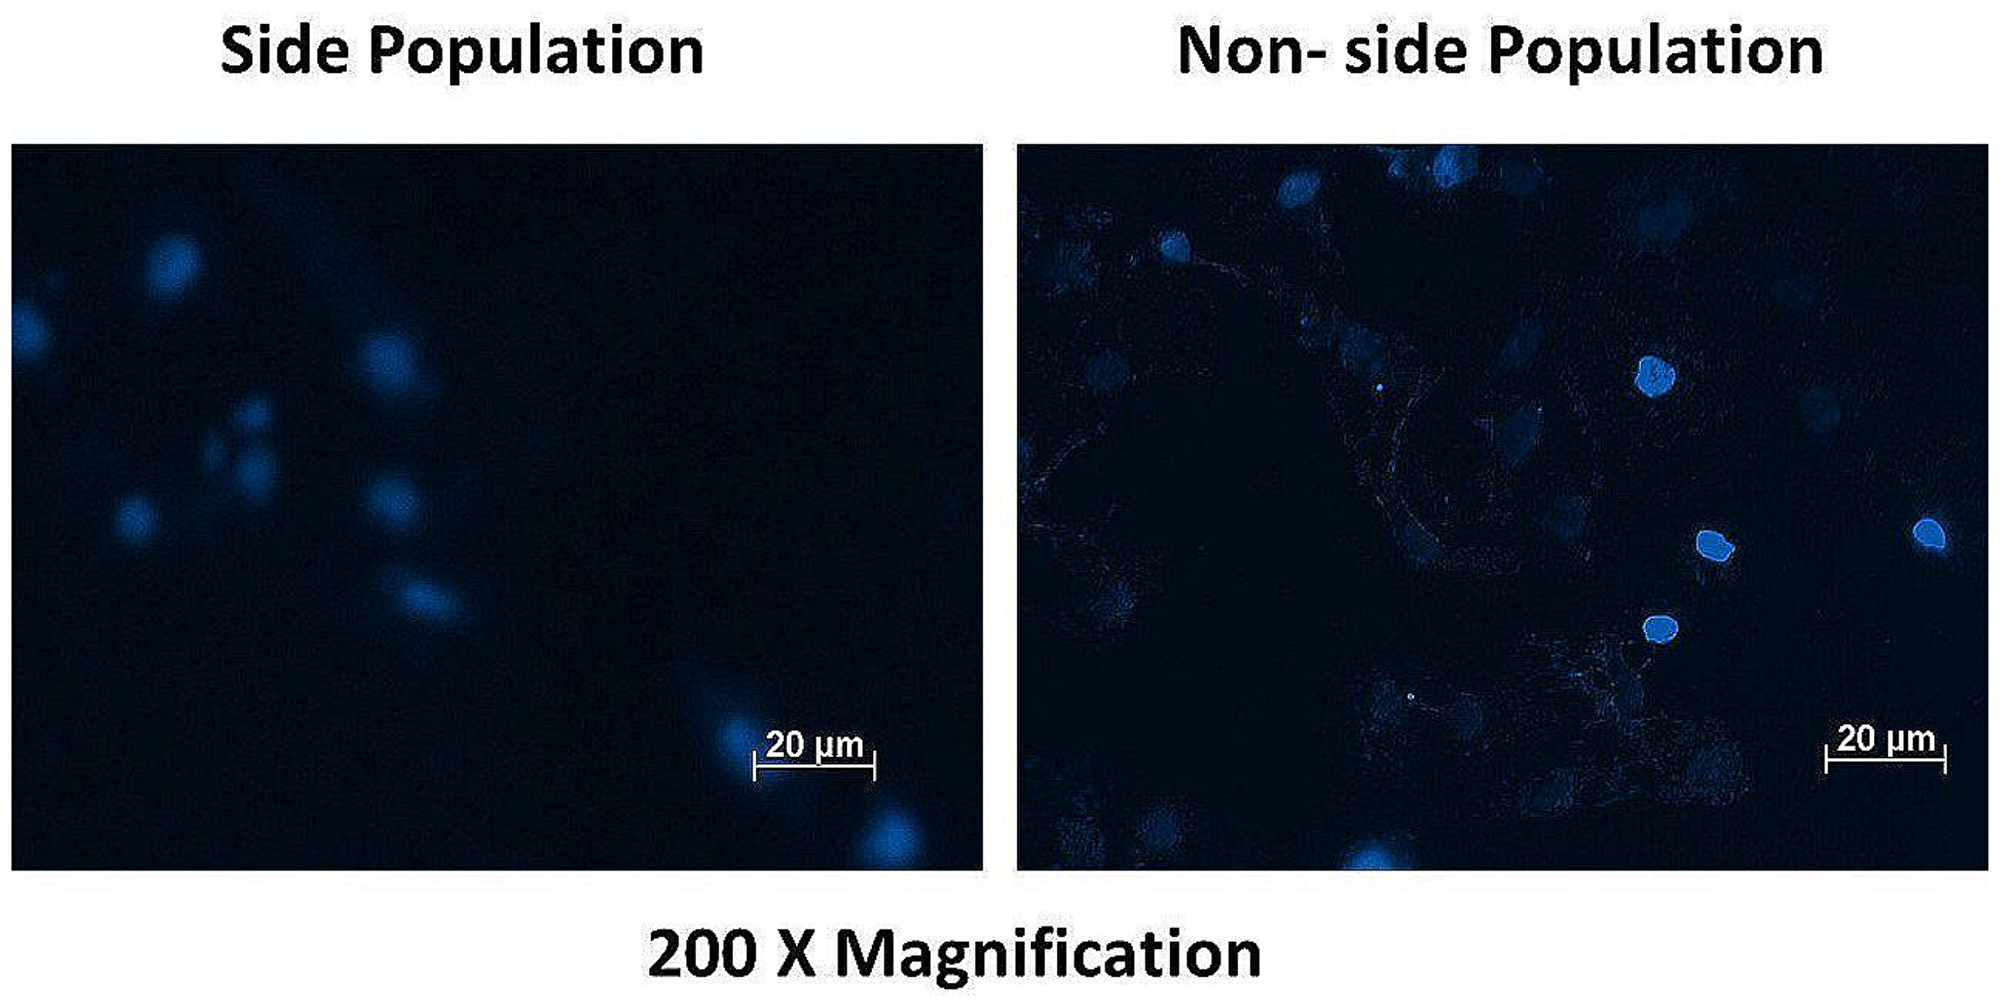 Fluorescence microscopy of the side and non-side population after staining with the dye Hoechst 33342 showing high fluorescence intensity (+++) in the non-side population of cells and a low fluorescence intensity (+) in the side population cells.